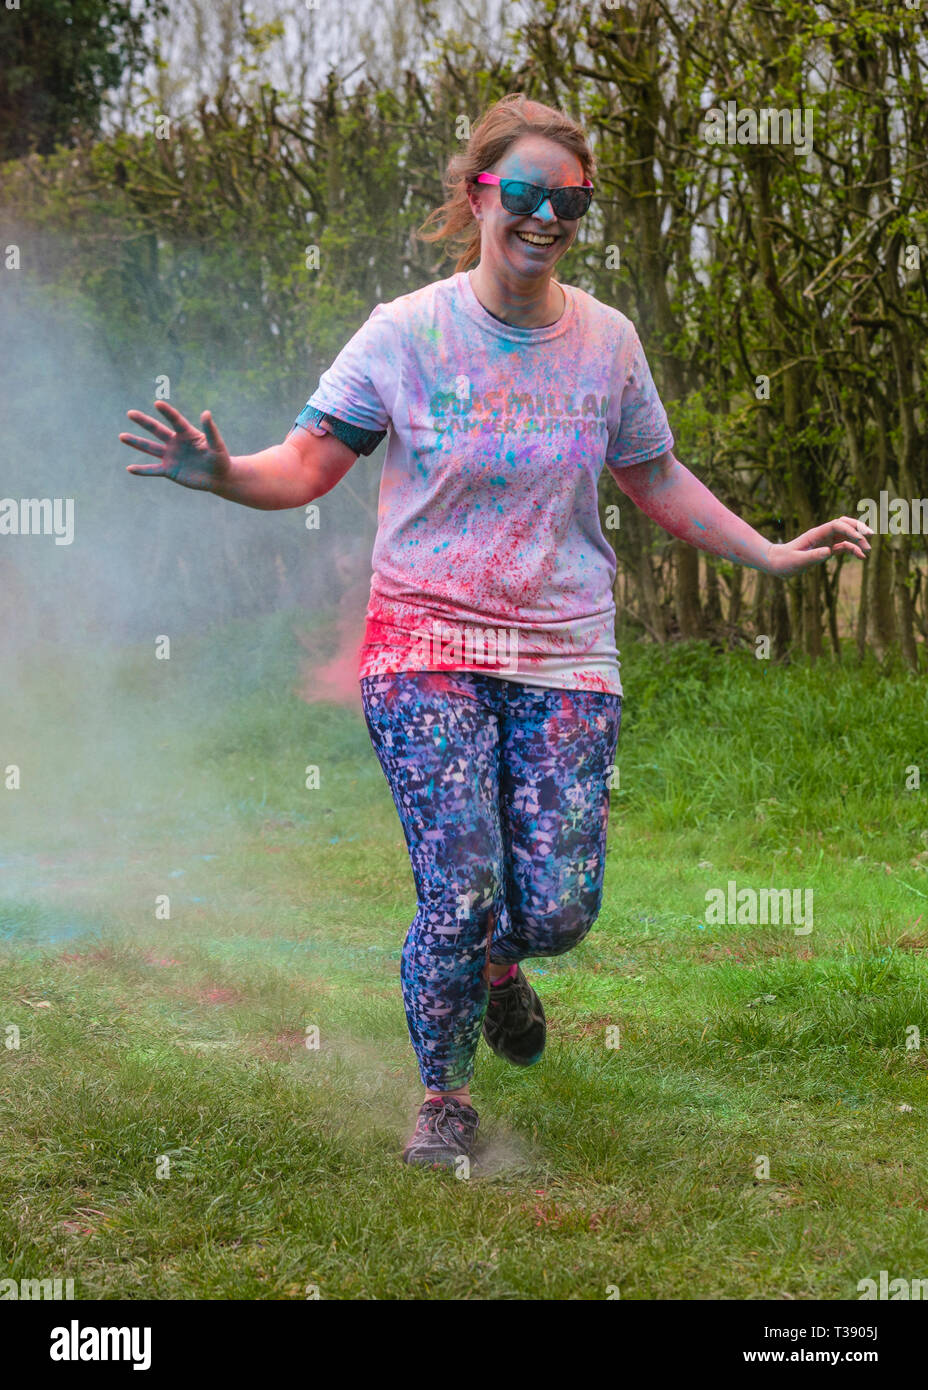 Female runner laughing and being covered in paint on Macmillan cancer charity 5K colour fun run. Stock Photo